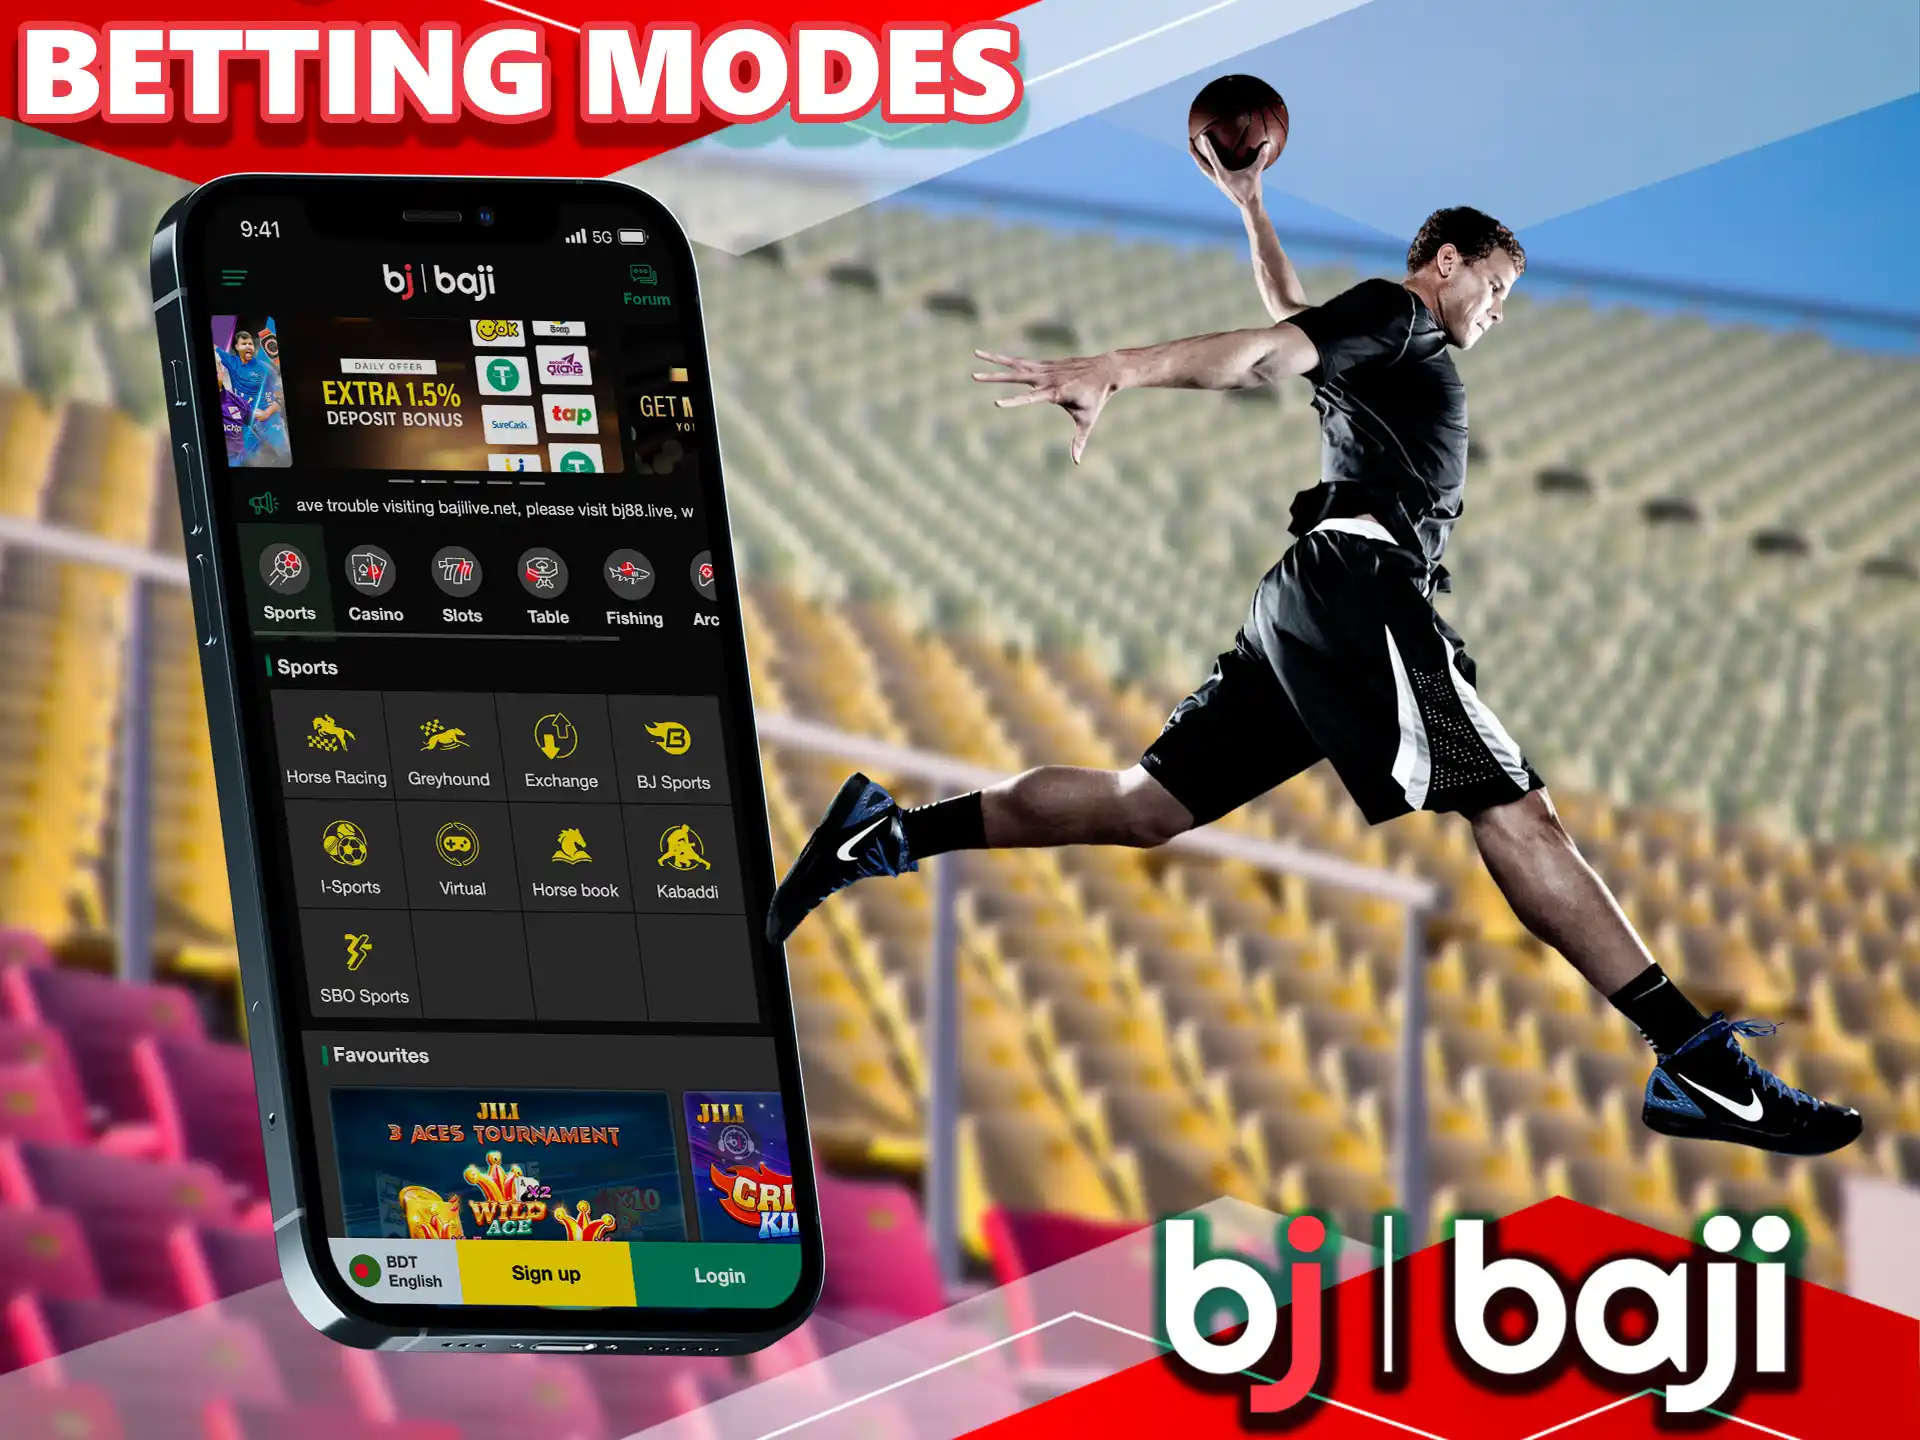 Find out what types of gameplay modes are available to players of the Baji app.